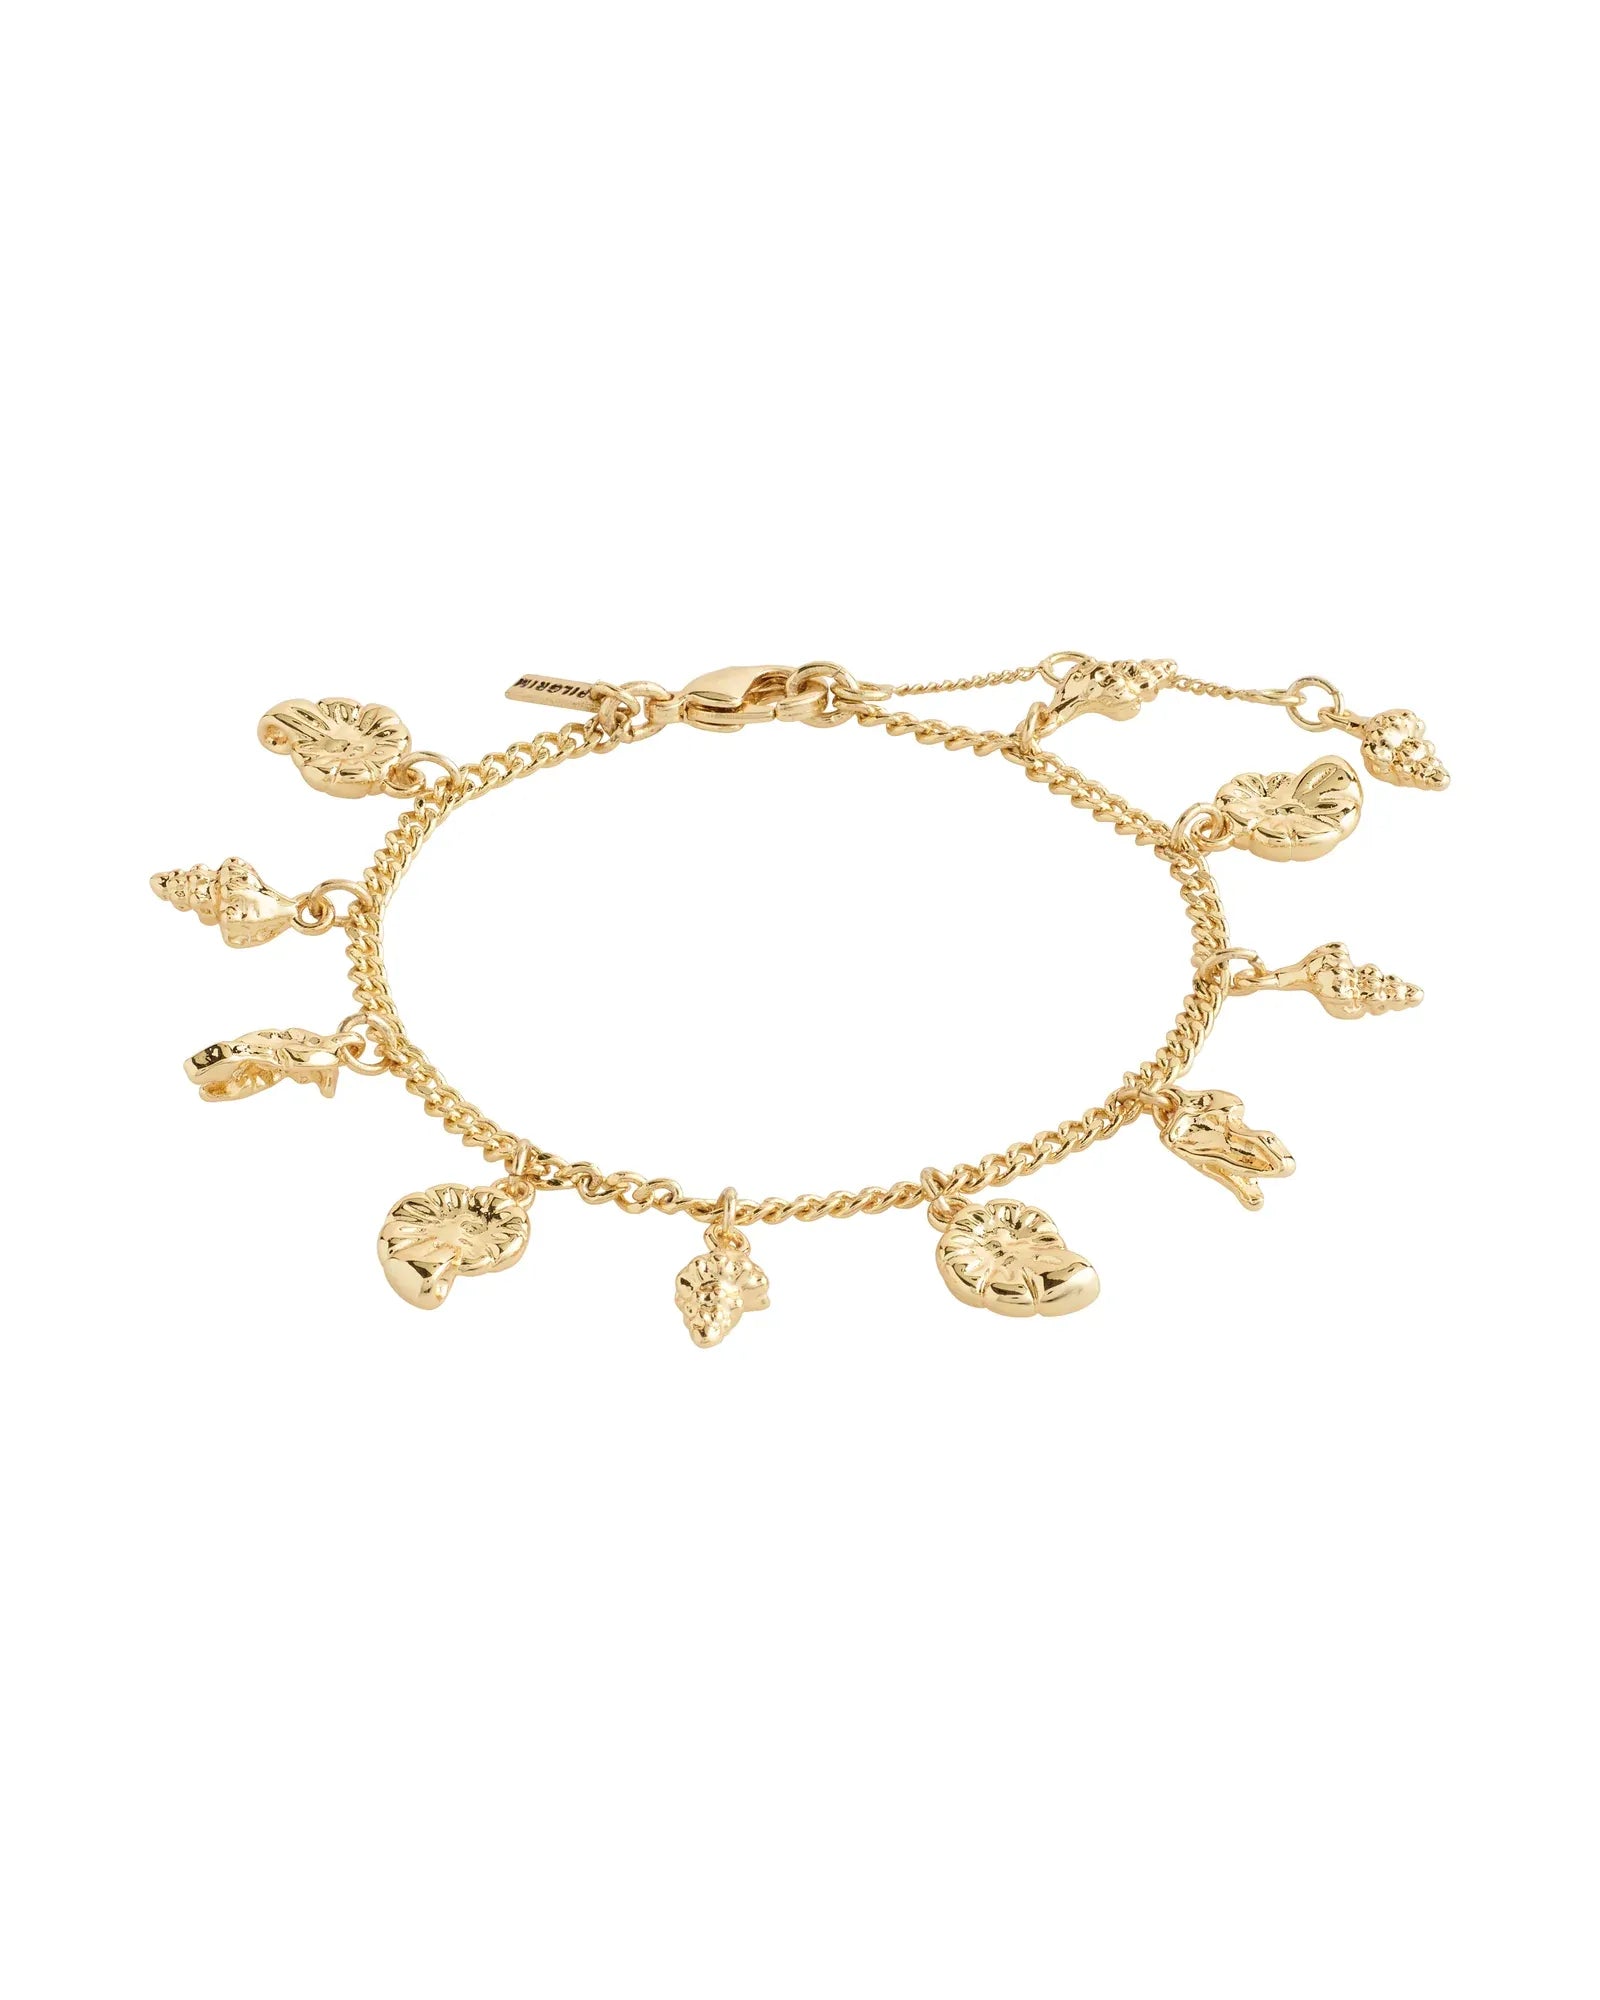 SEA Recycled Bracelet - Gold Plated